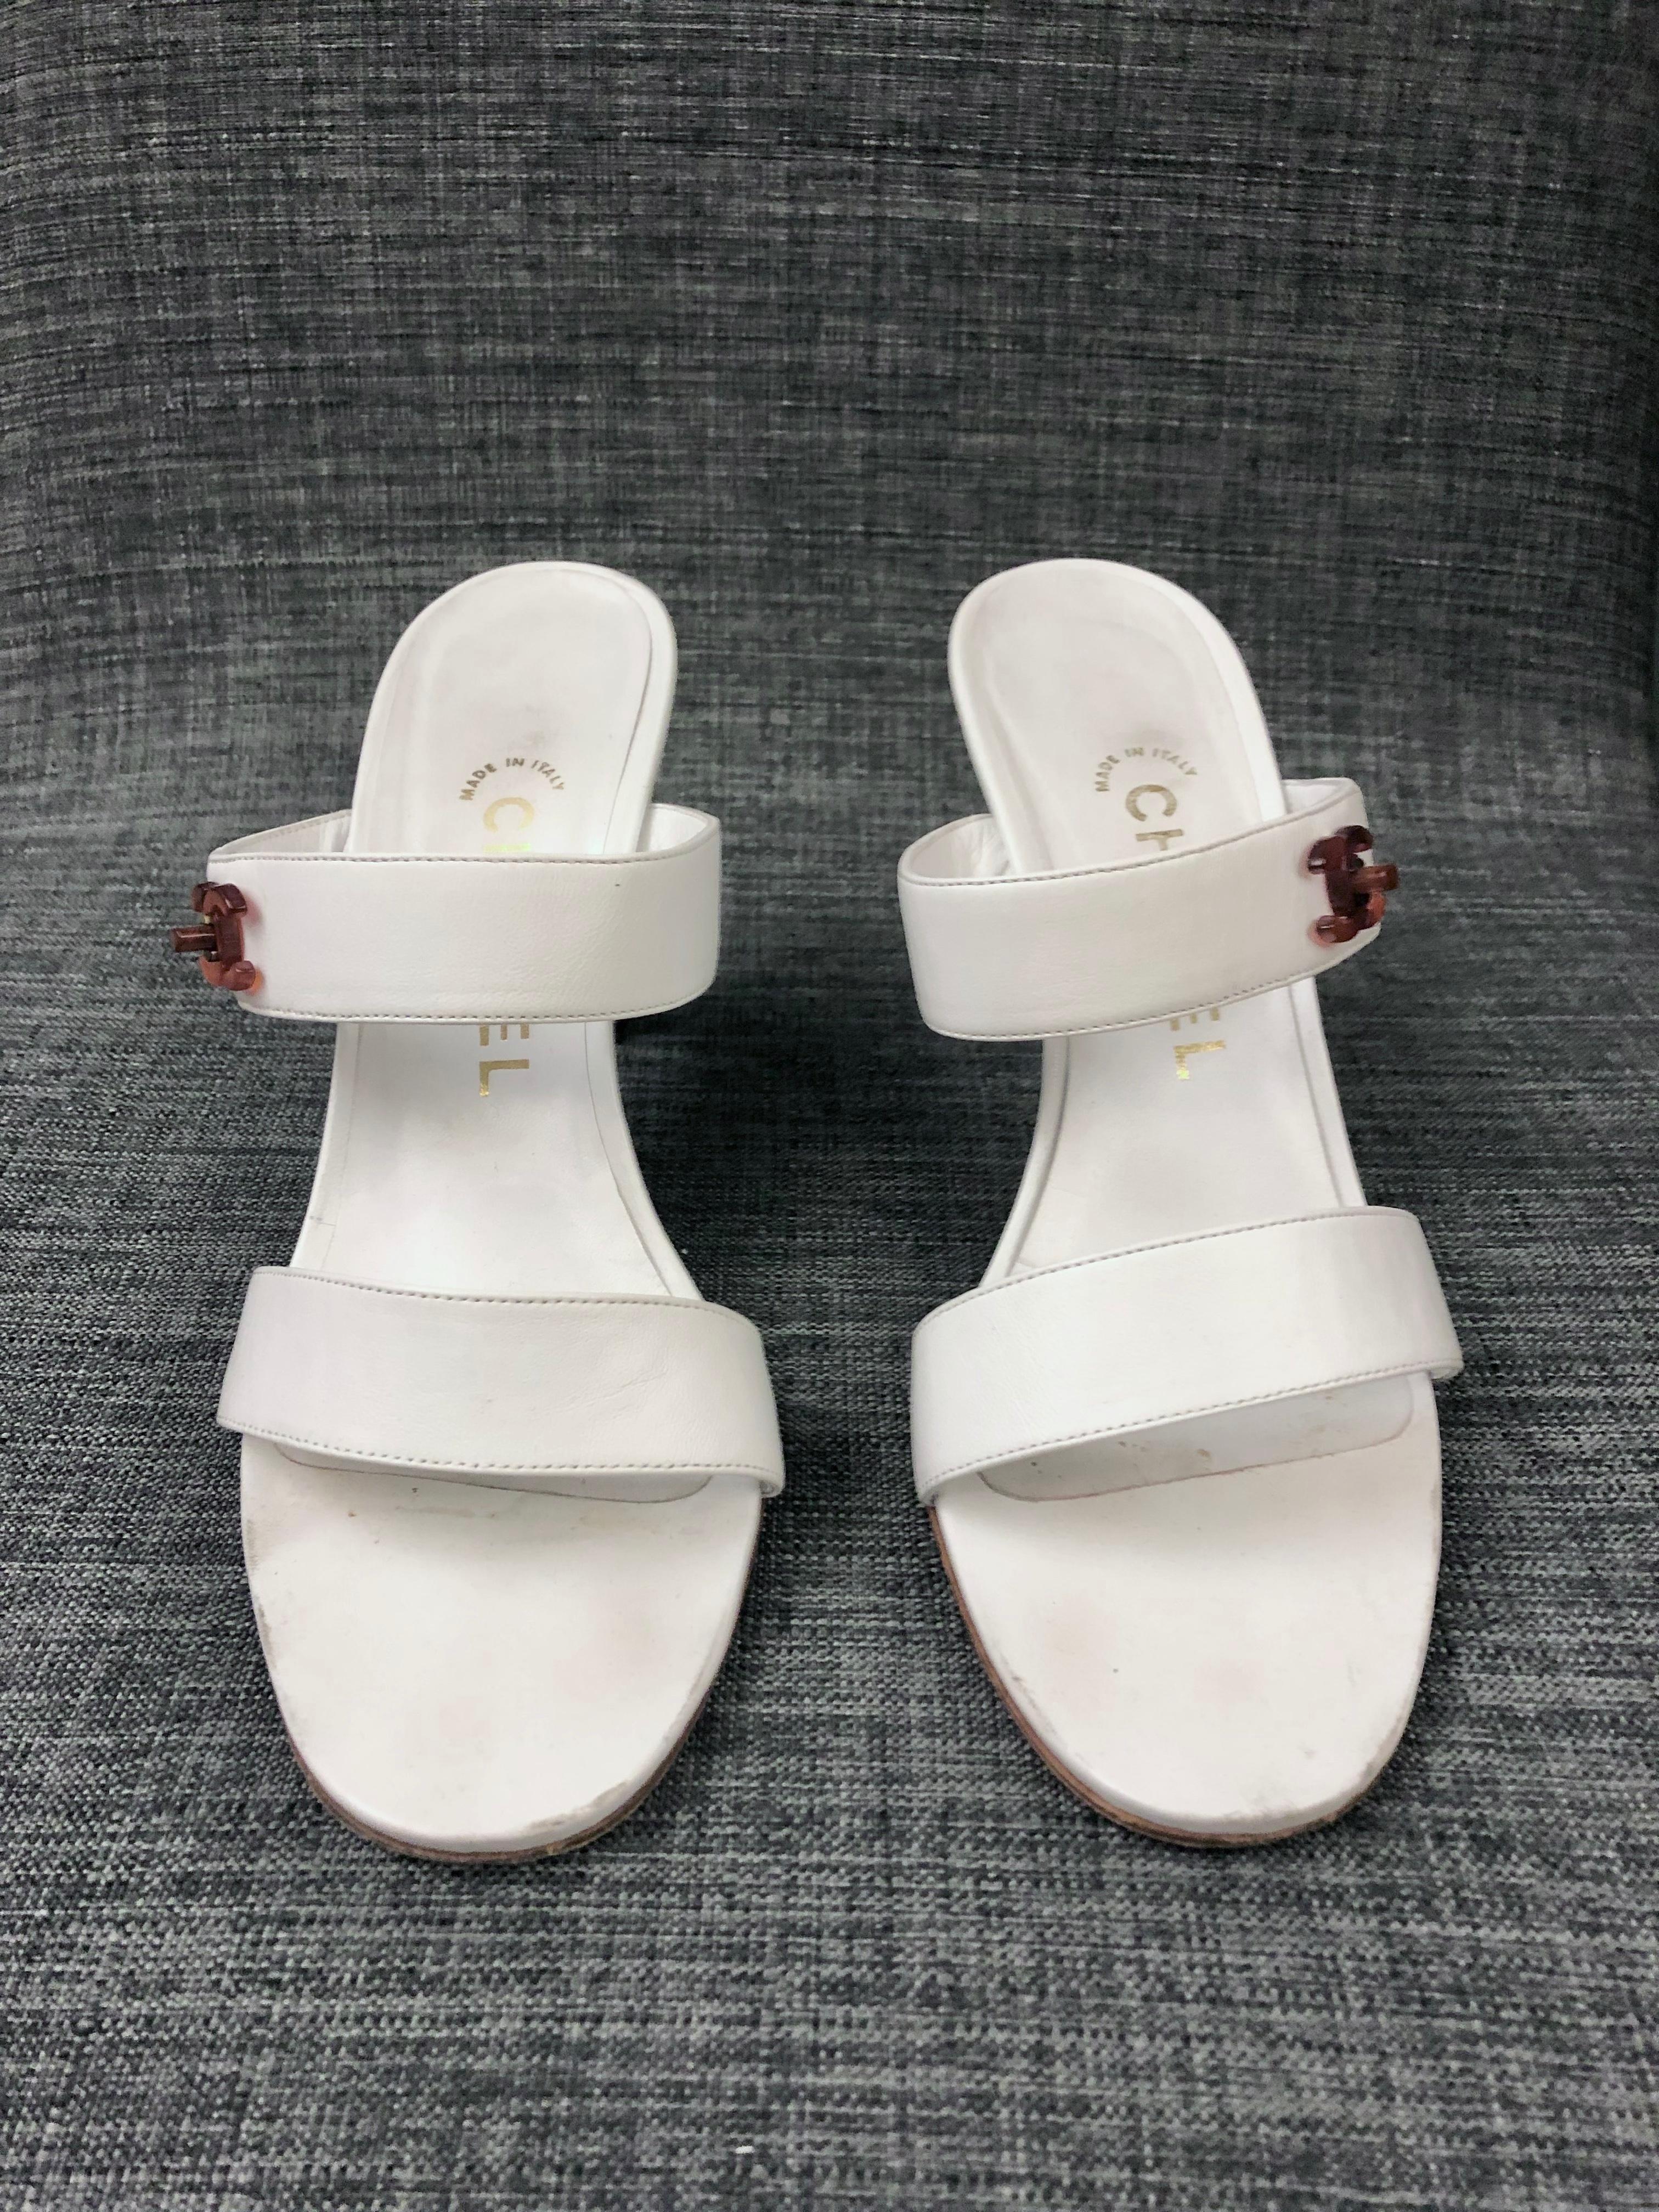 - Vintage 90s Chanel white lambskin leather CC logo made in tortoiseshell sandal heels. 

- Size 38. 

- Made in Italy